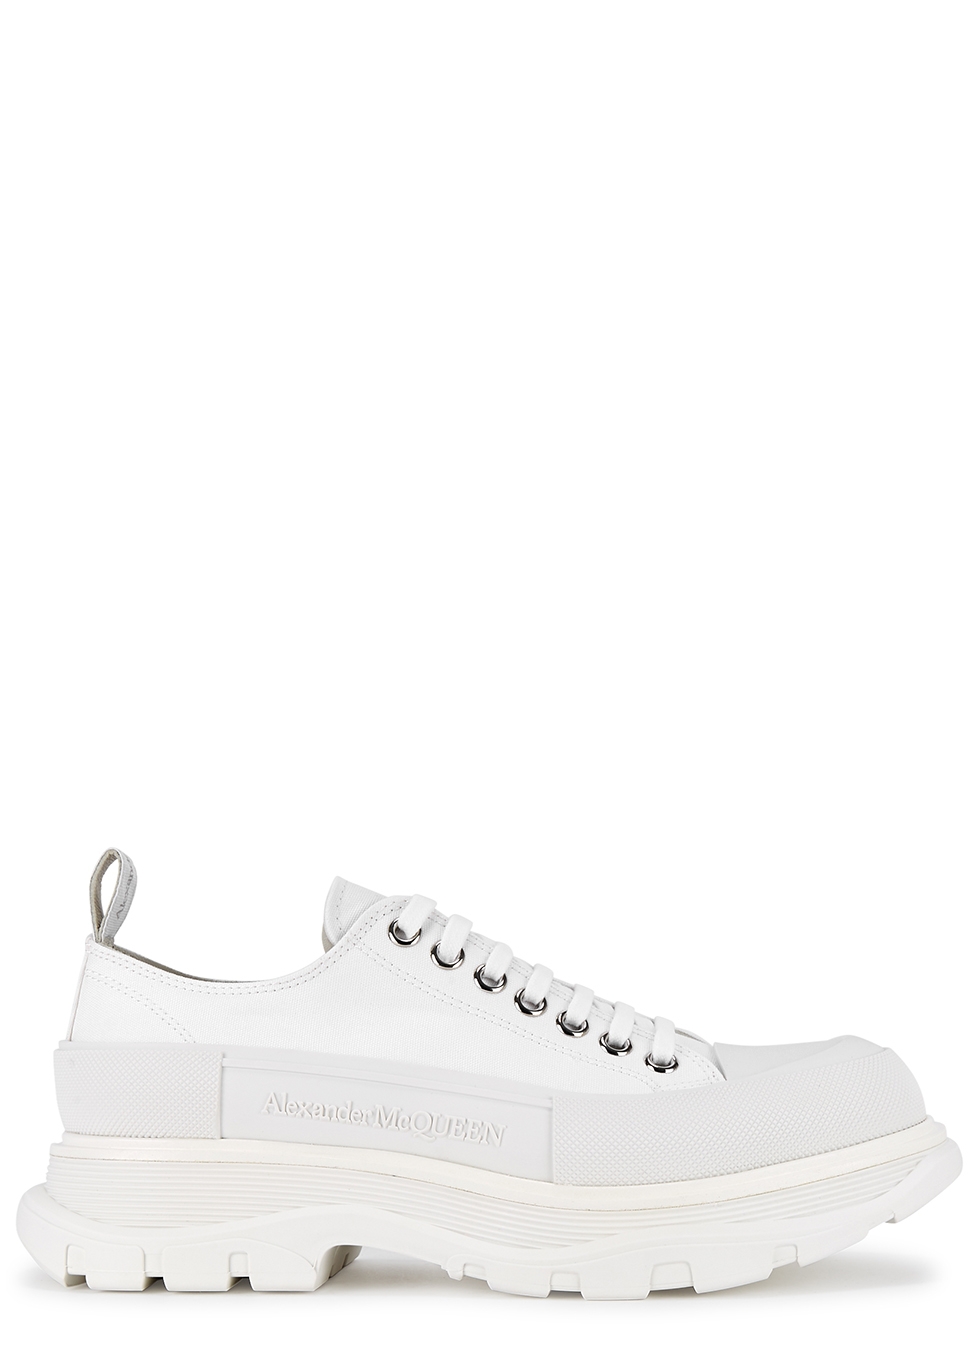 black and white canvas sneakers